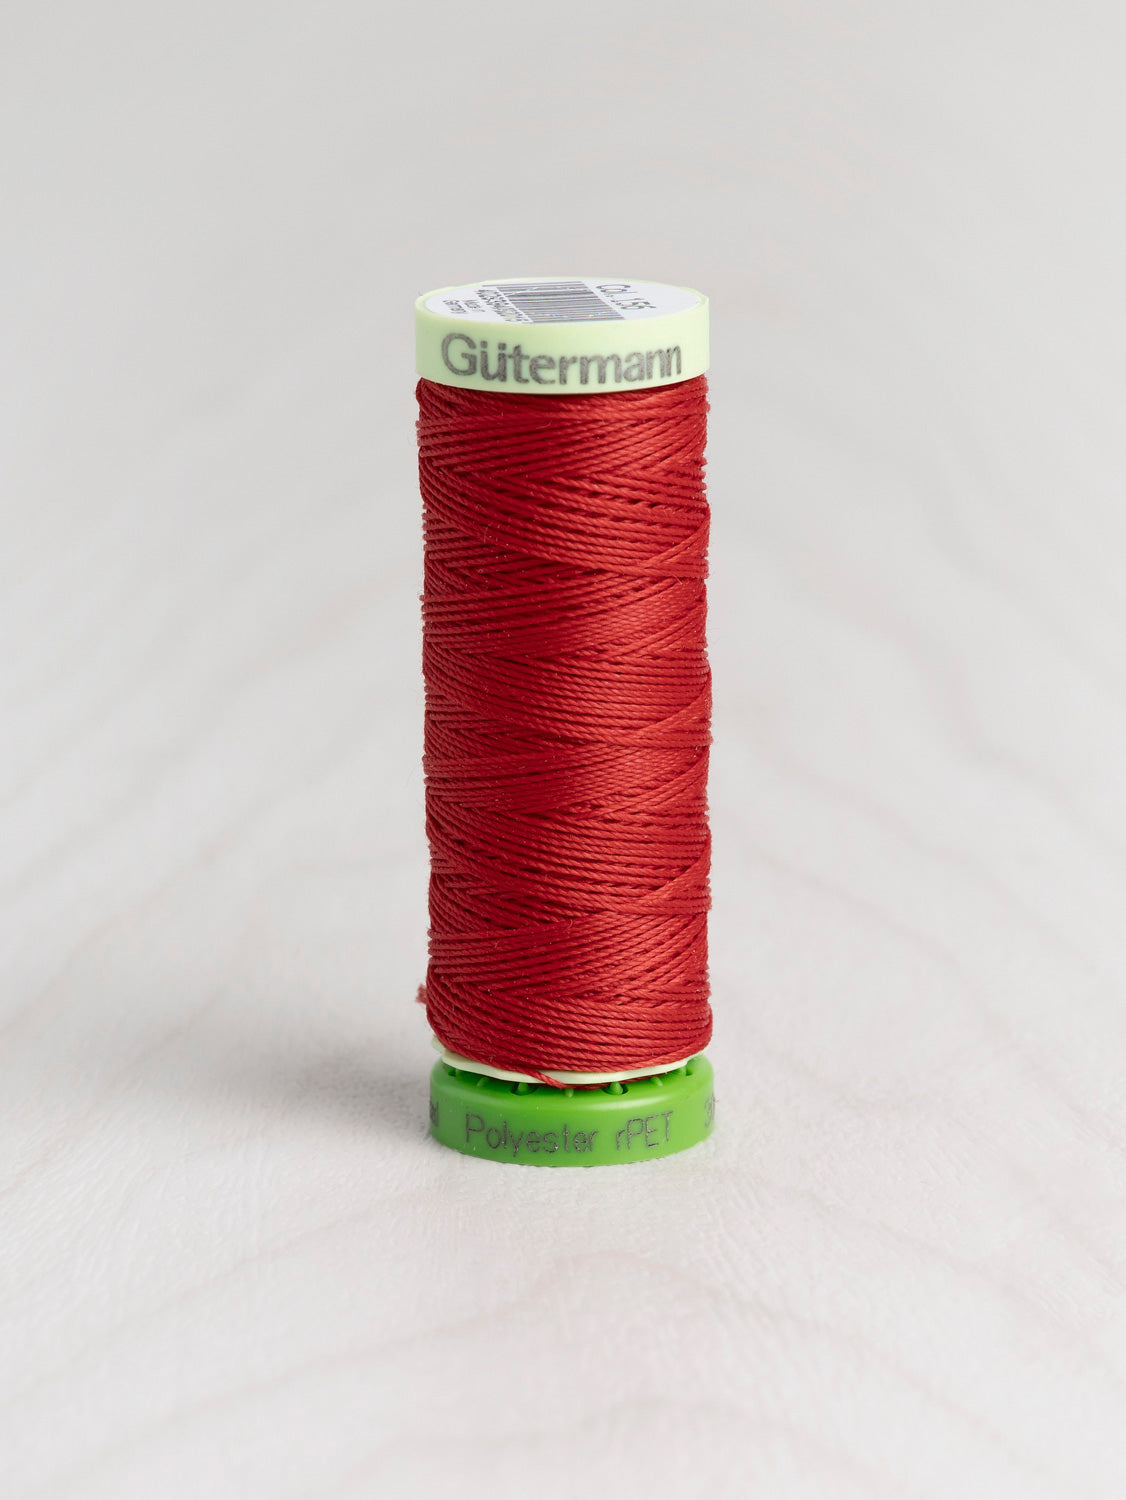 Gütermann rPET Recycled Topstitch Thread - Red 156 | Core Fabrics